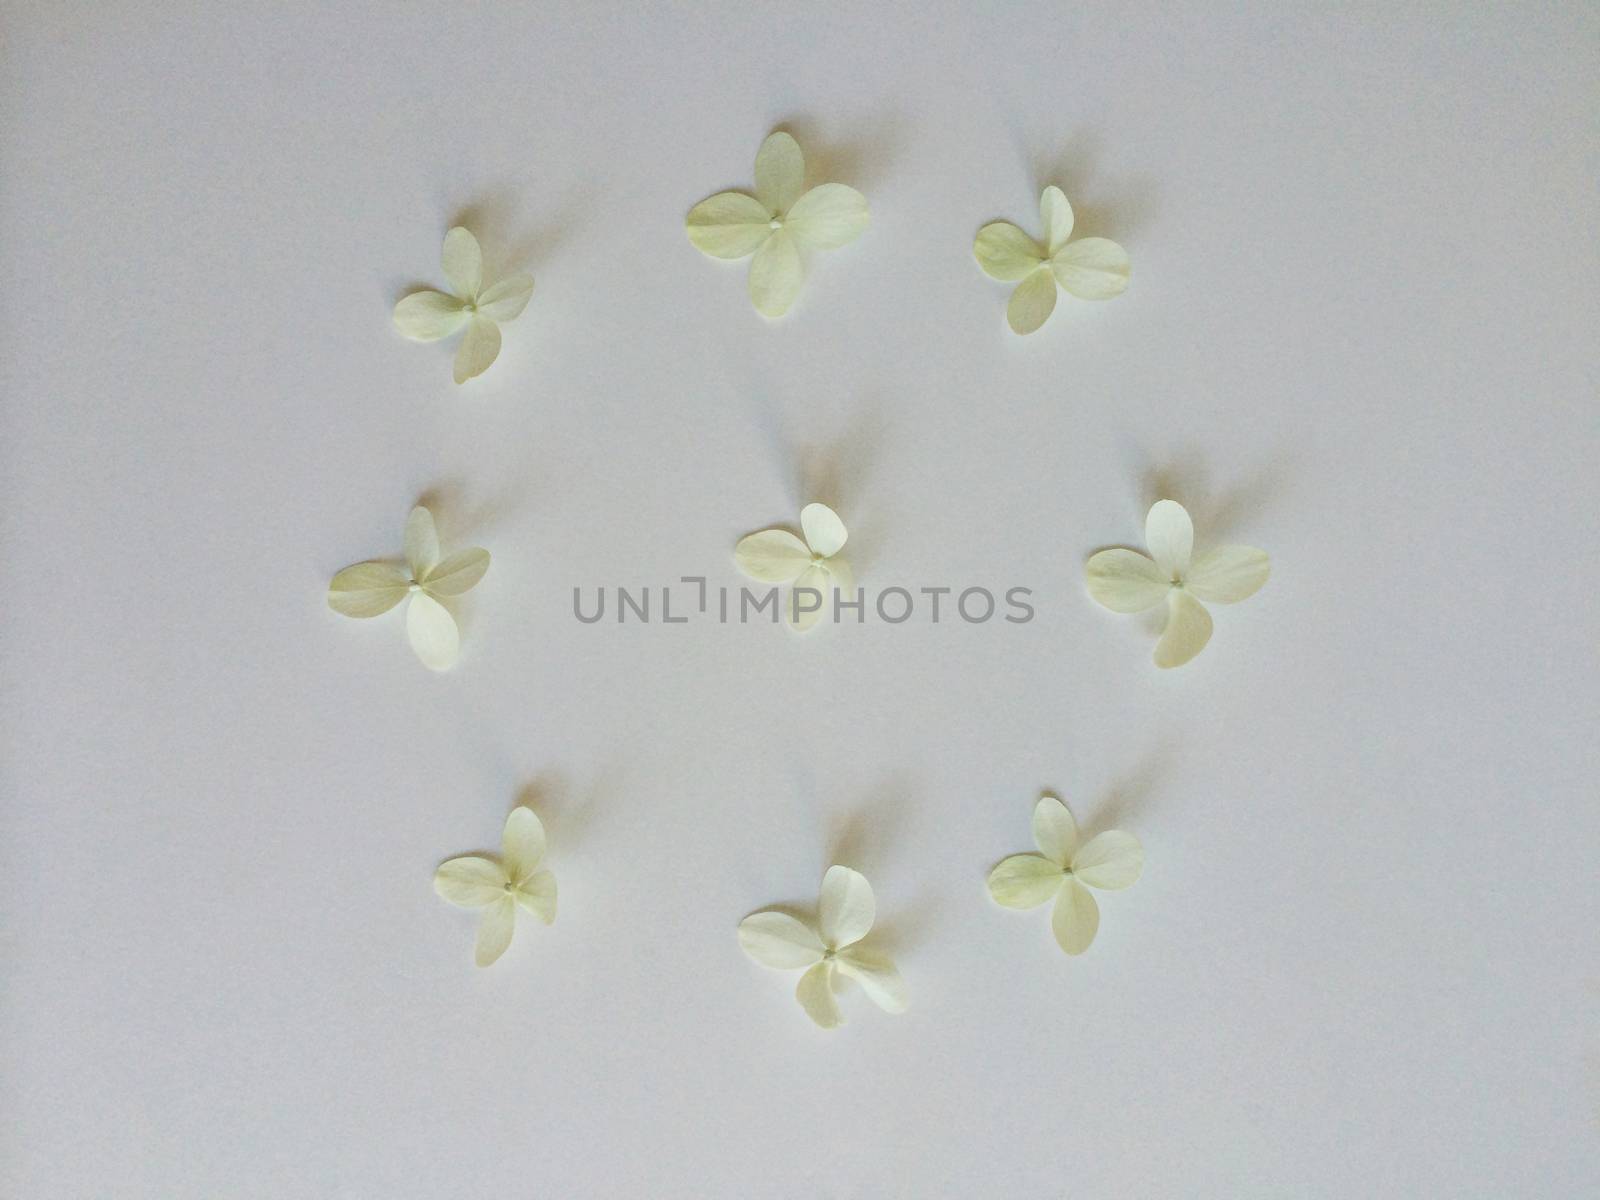 Nine white hydrangea flowers layed out in a circular pattern